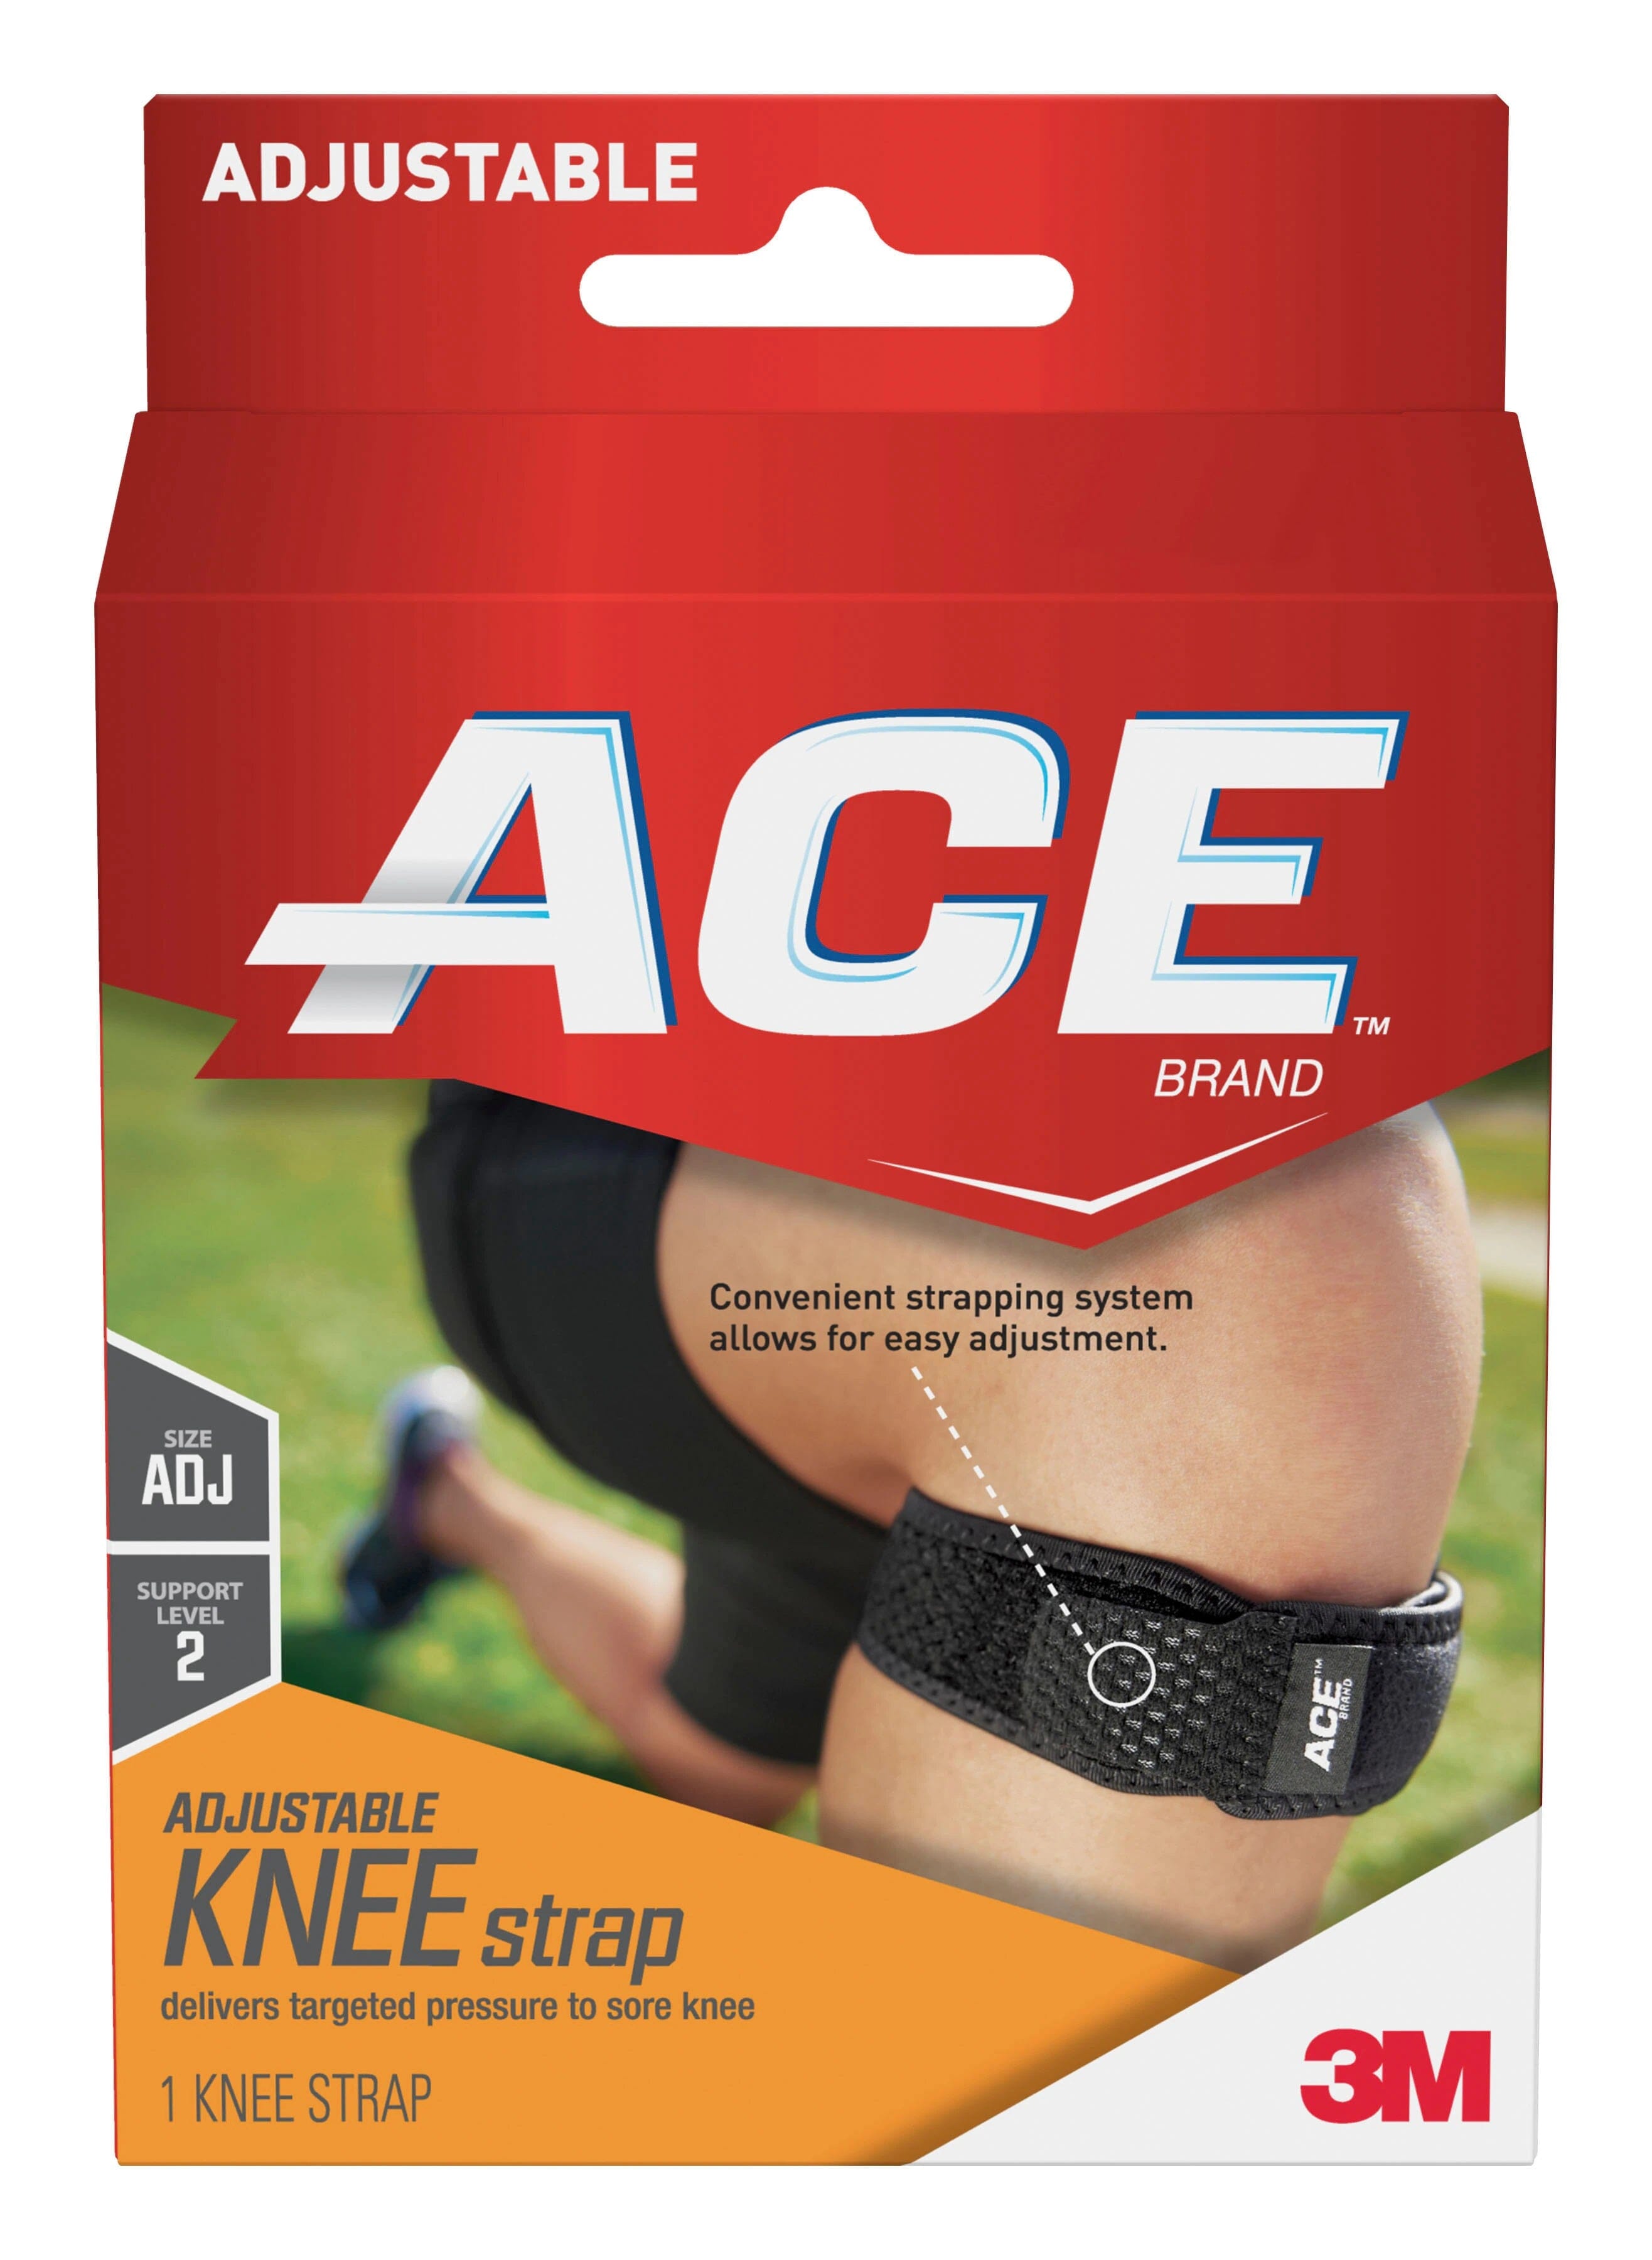 Purchase Standard Orthopedic Leg Support Belt products 